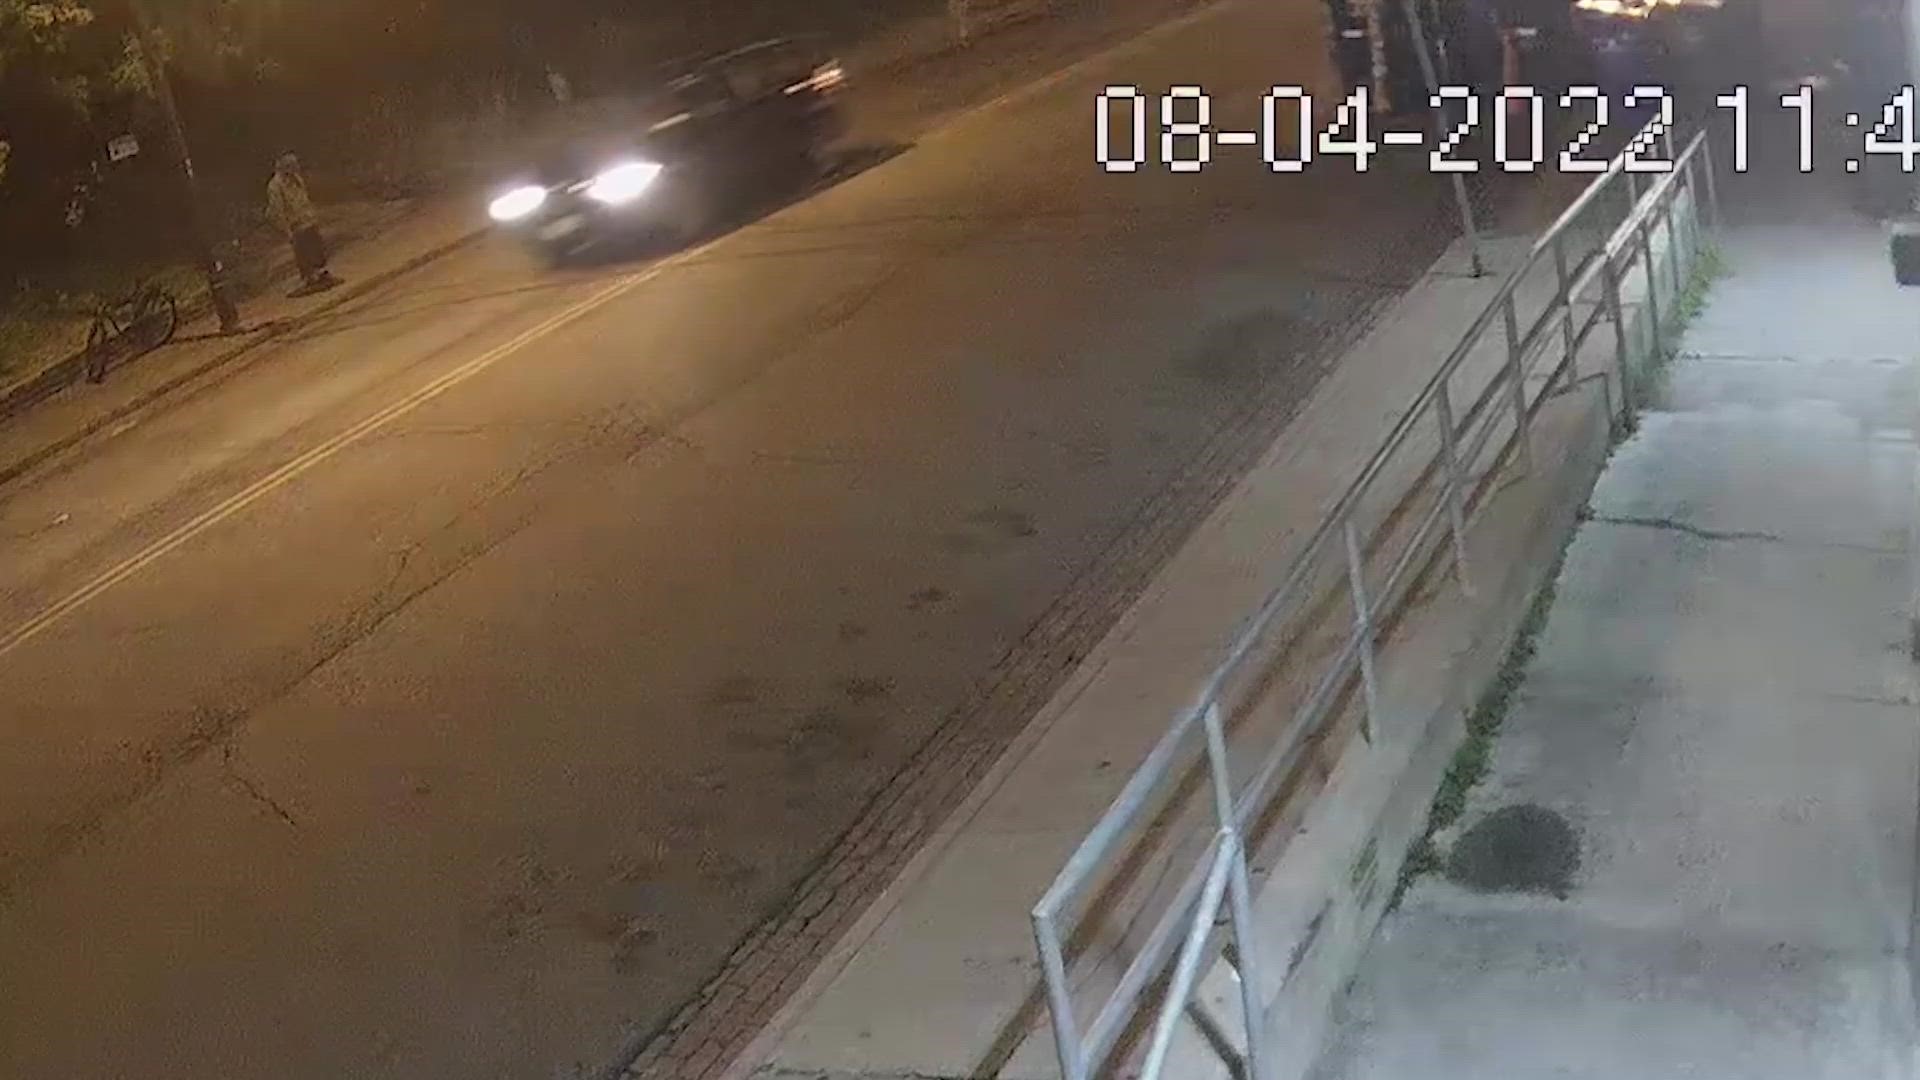 Buffalo police are releasing surveillance video in connection with the August 4 fatal shooting on West Utica Street.